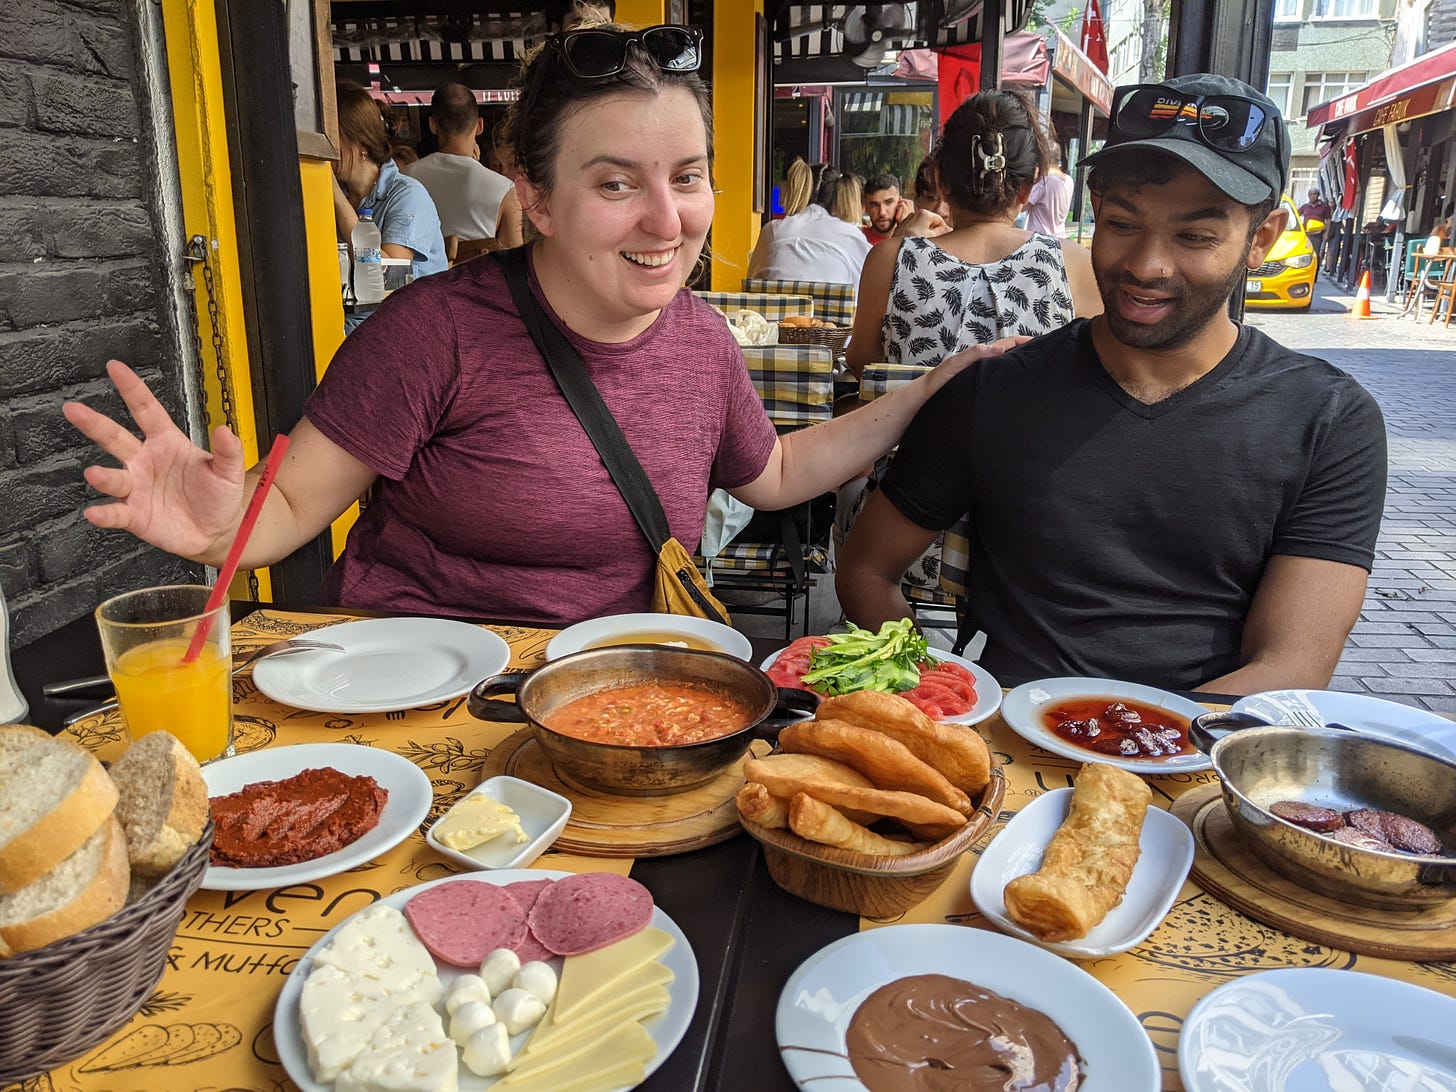 Aseef and Iulia are wowed before a table of many small plates, including 'menemen' -- Turkish scrambled eggs in a tomato sauce-- cheeses, meats, honey, clotted cream, and more. The table is laden and it looks like plates might well fall off by the time they're through.